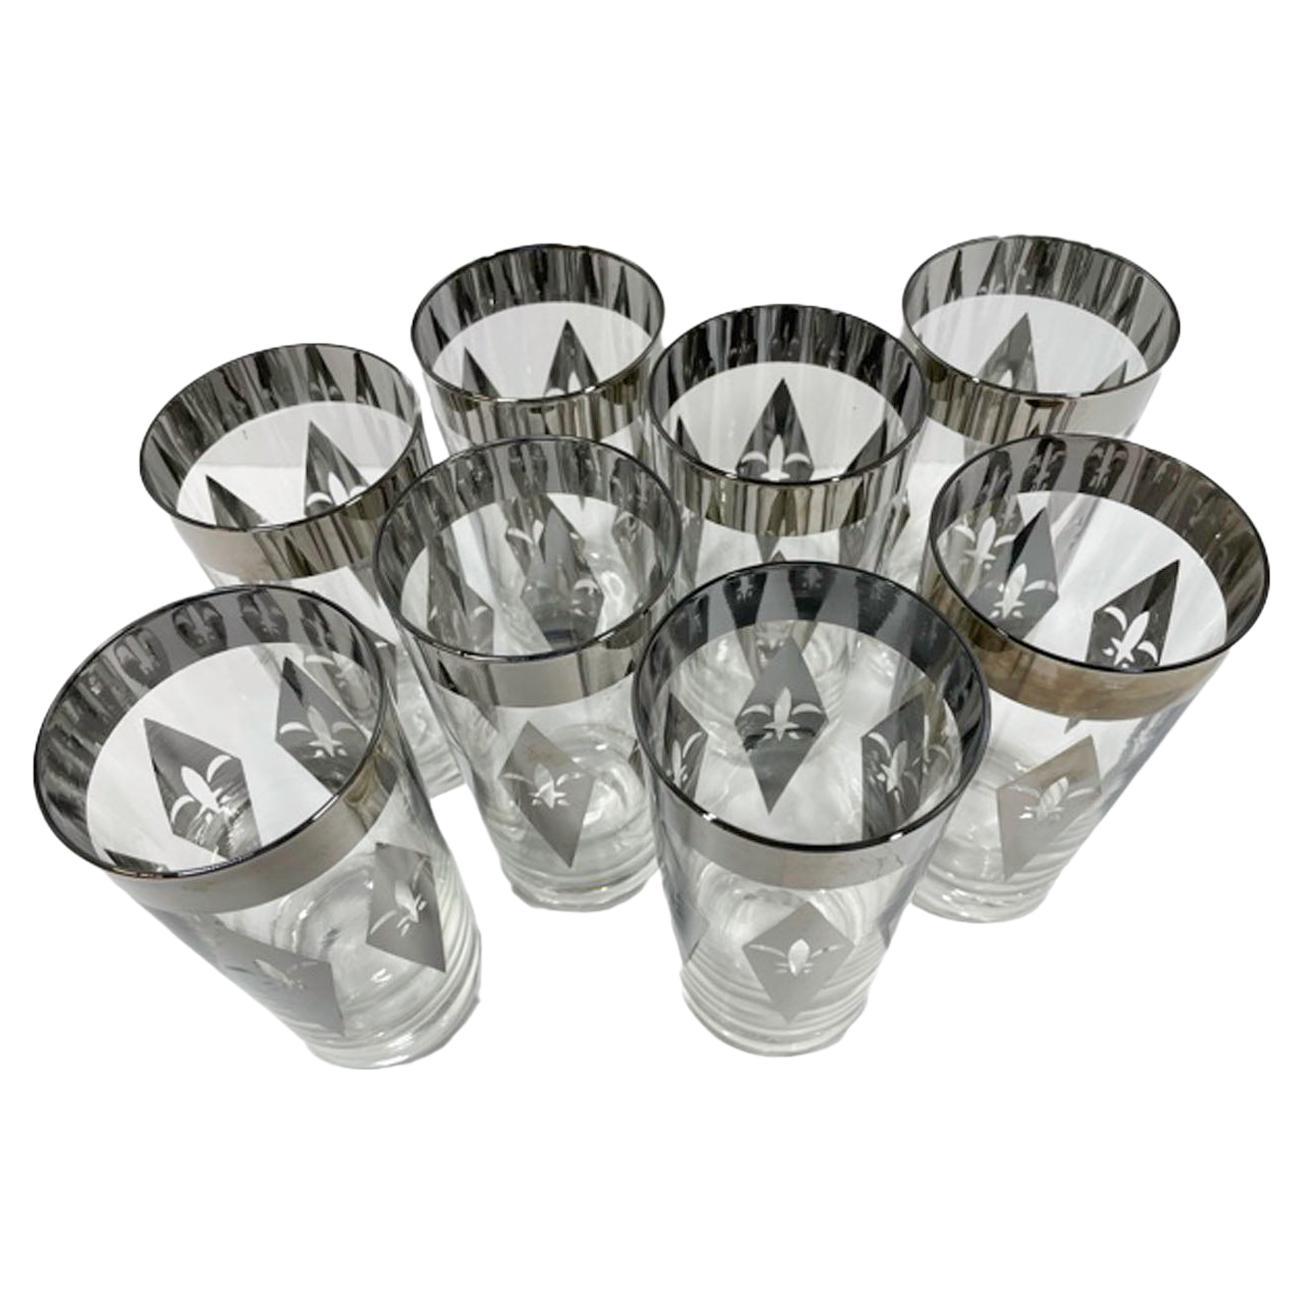 Vintage Silver Decorated Highball Glasses with Fleur de Lis in Elongated Diamond For Sale